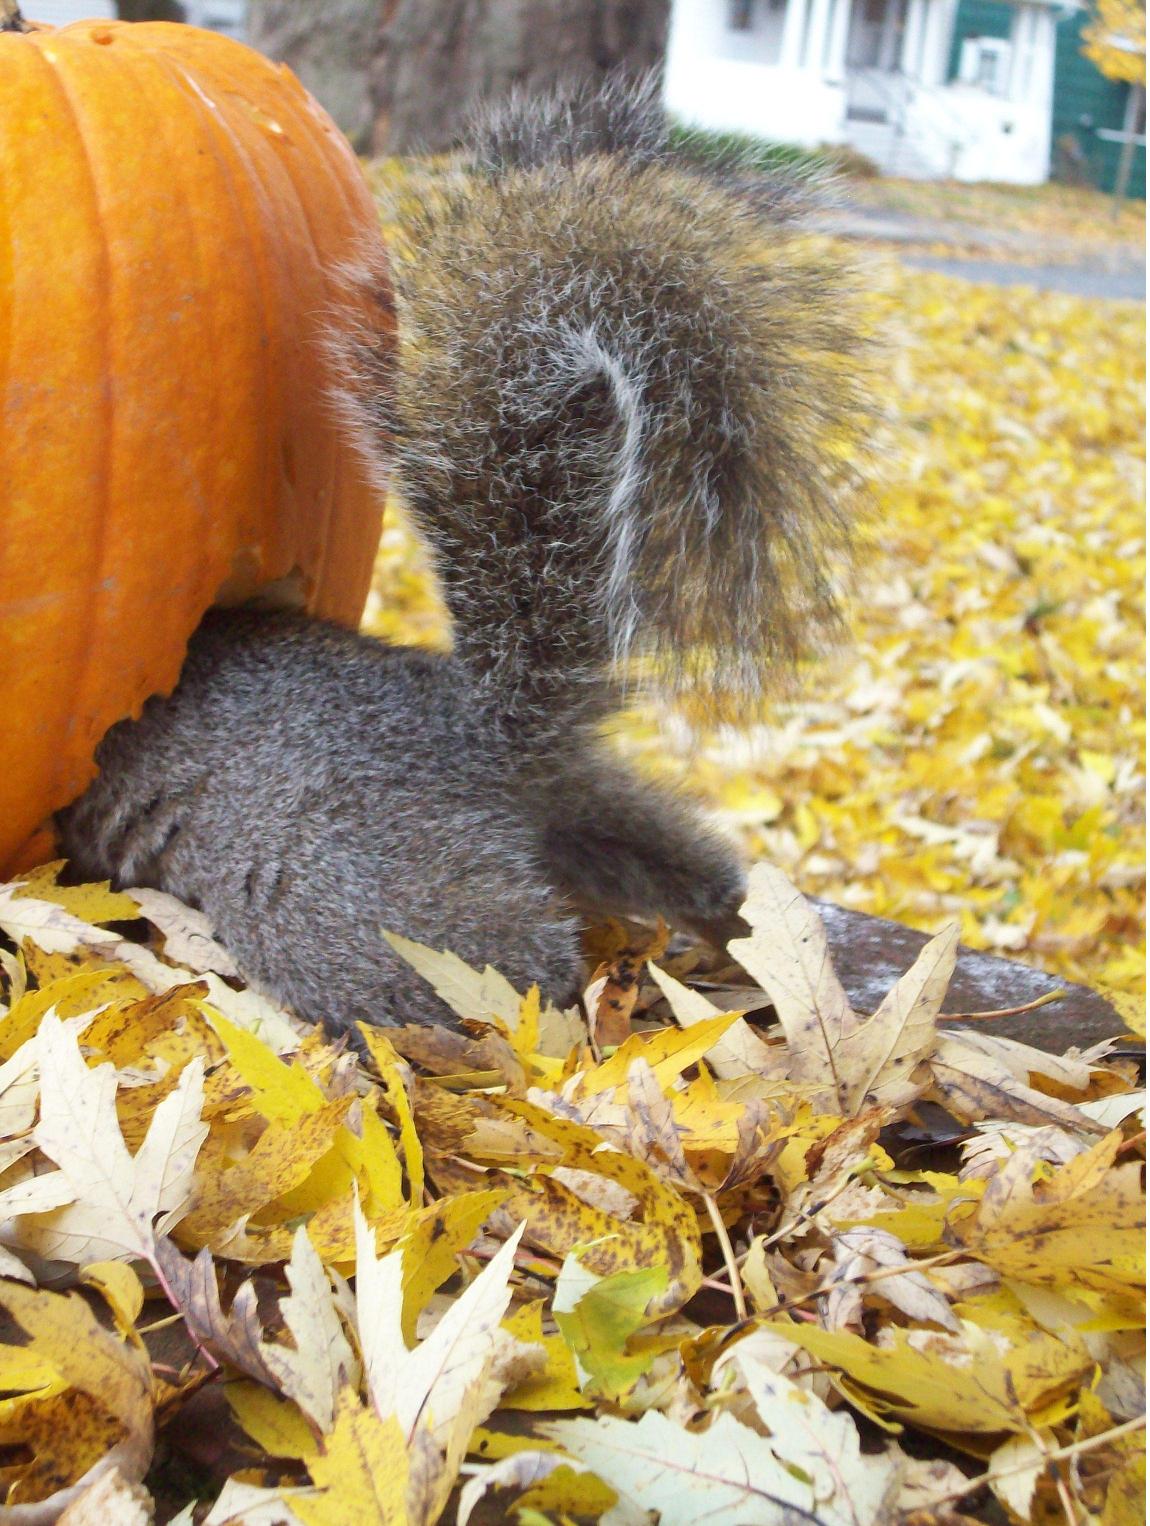 The Squirrel And The Pumkin (user submitted)